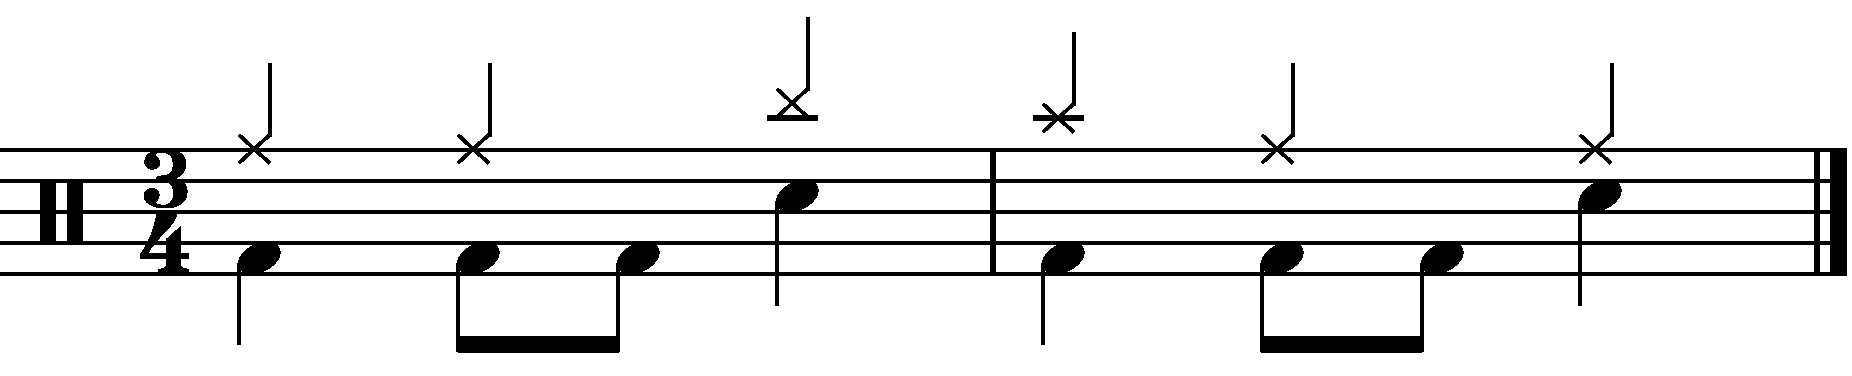 The concept applied to a 3/4 groove